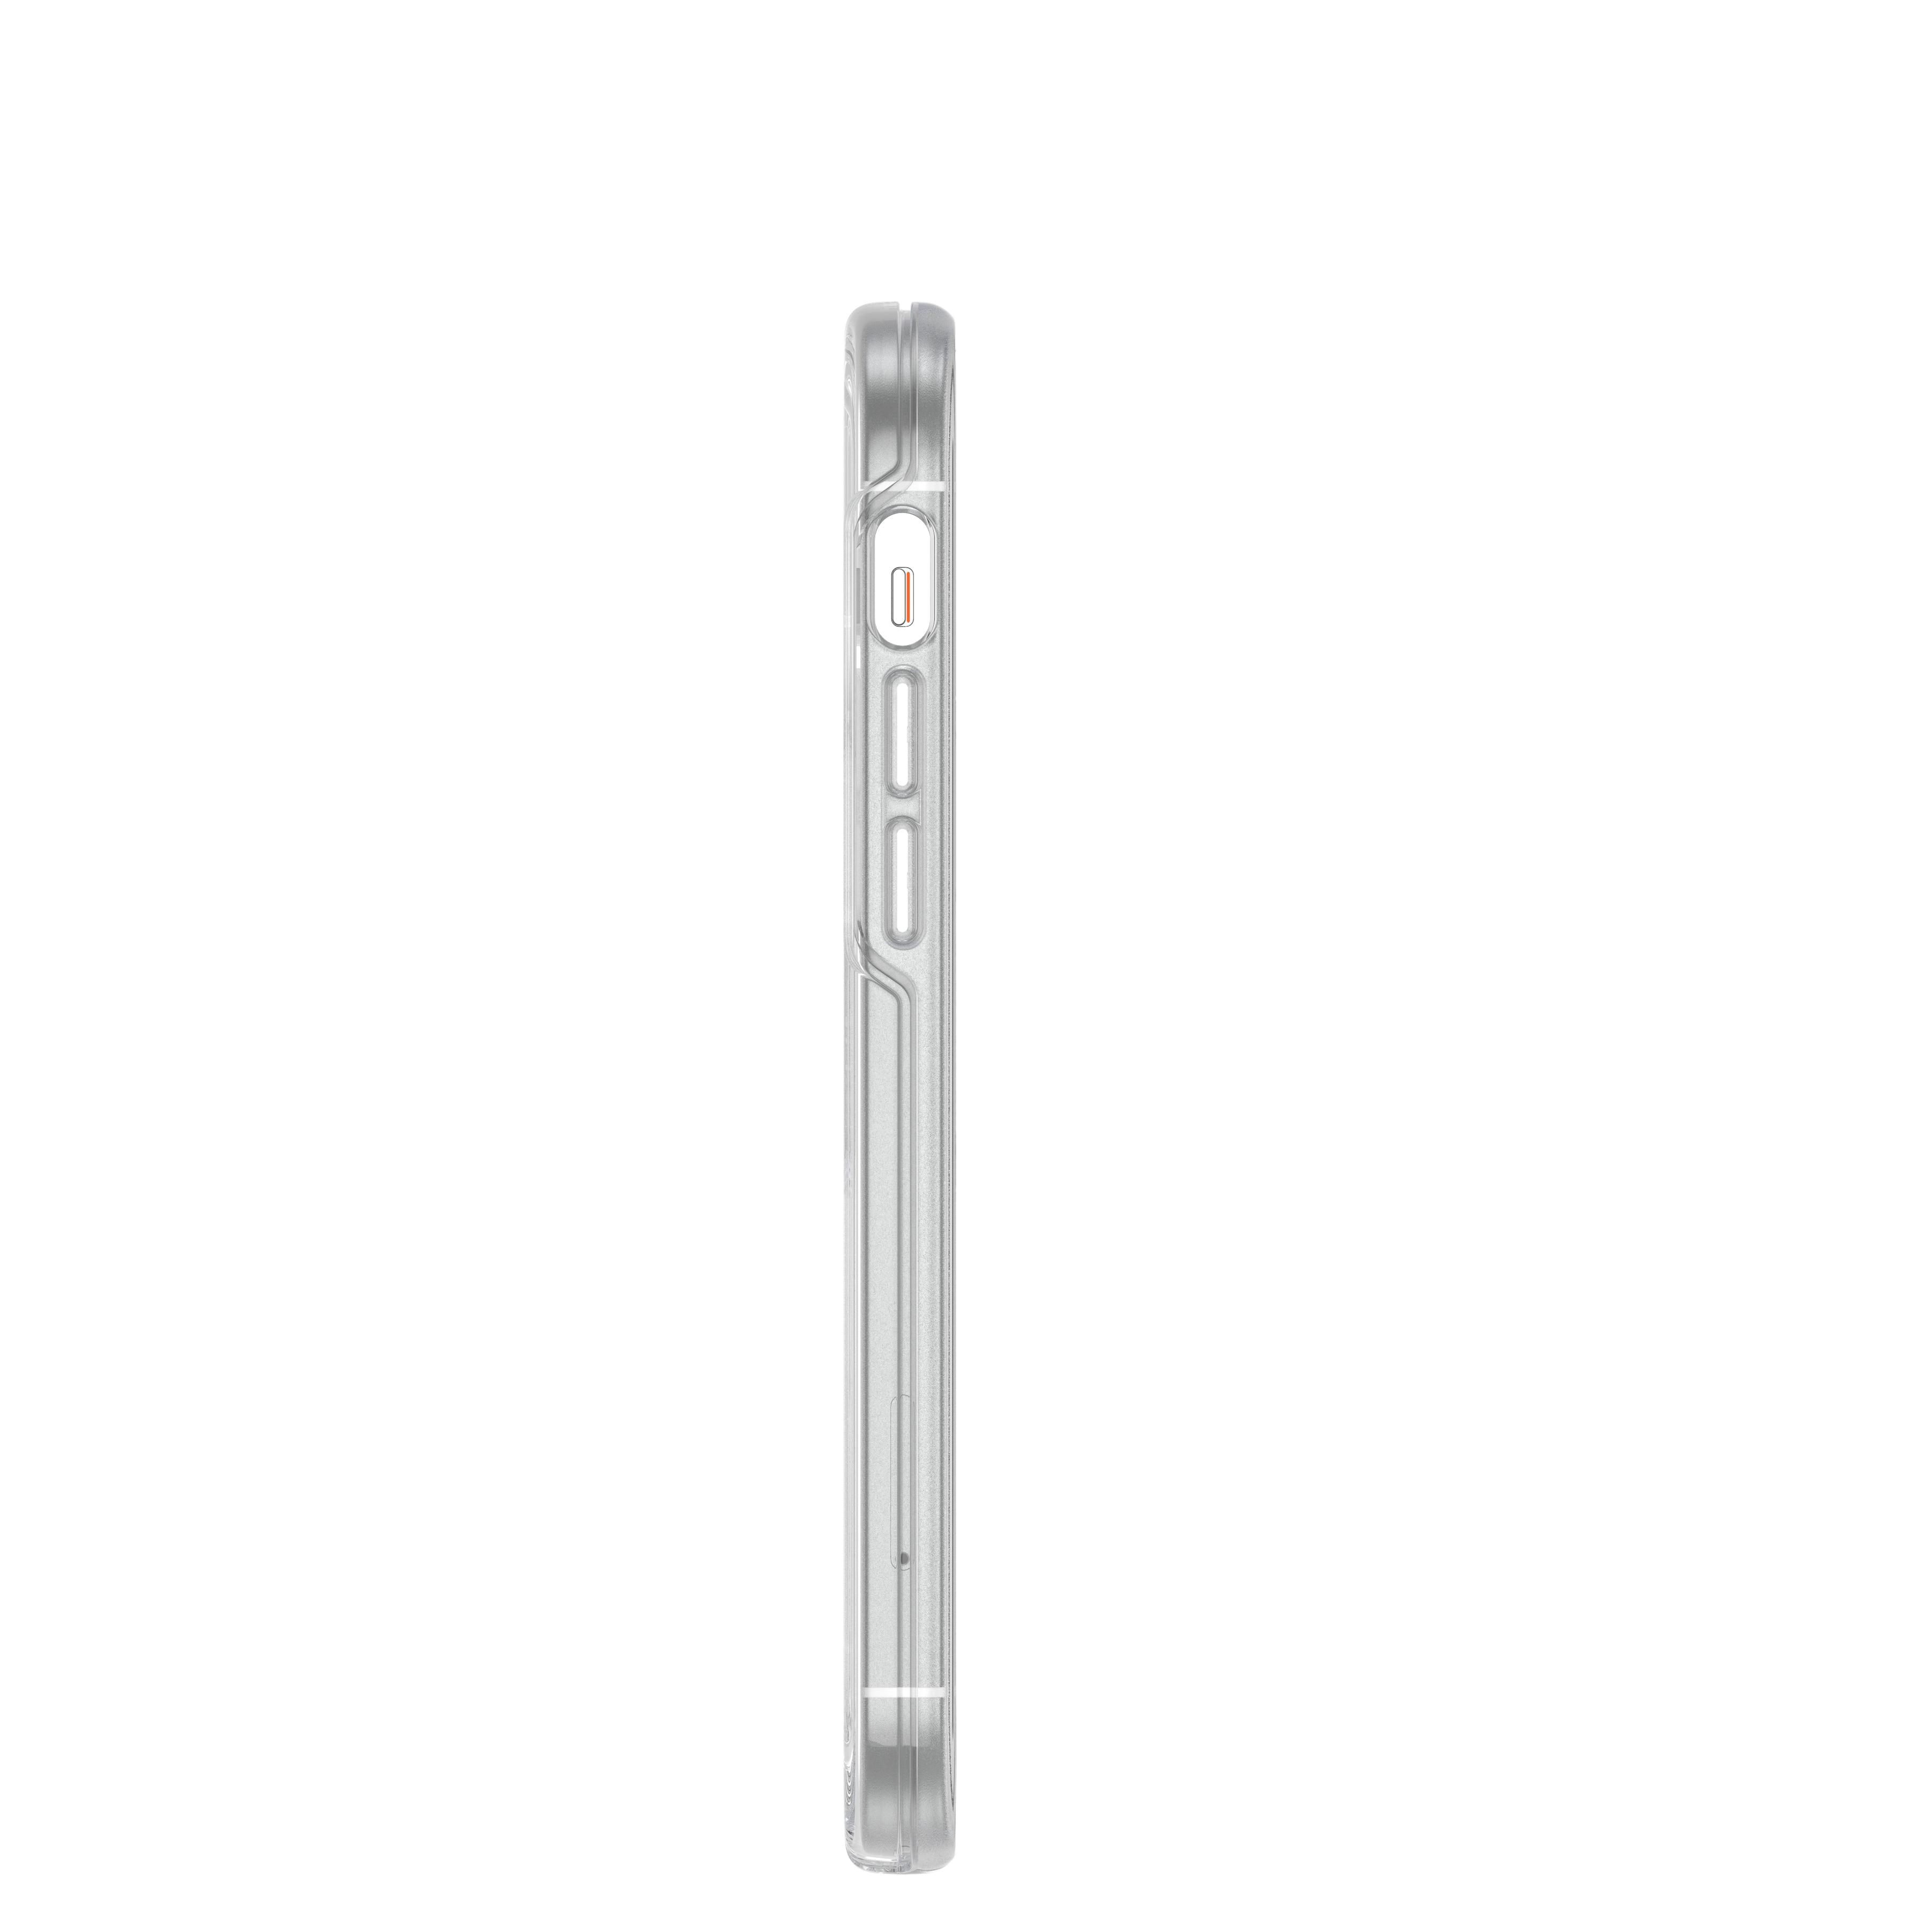 Coque Symmetry iPhone 12/12 Pro, Clear